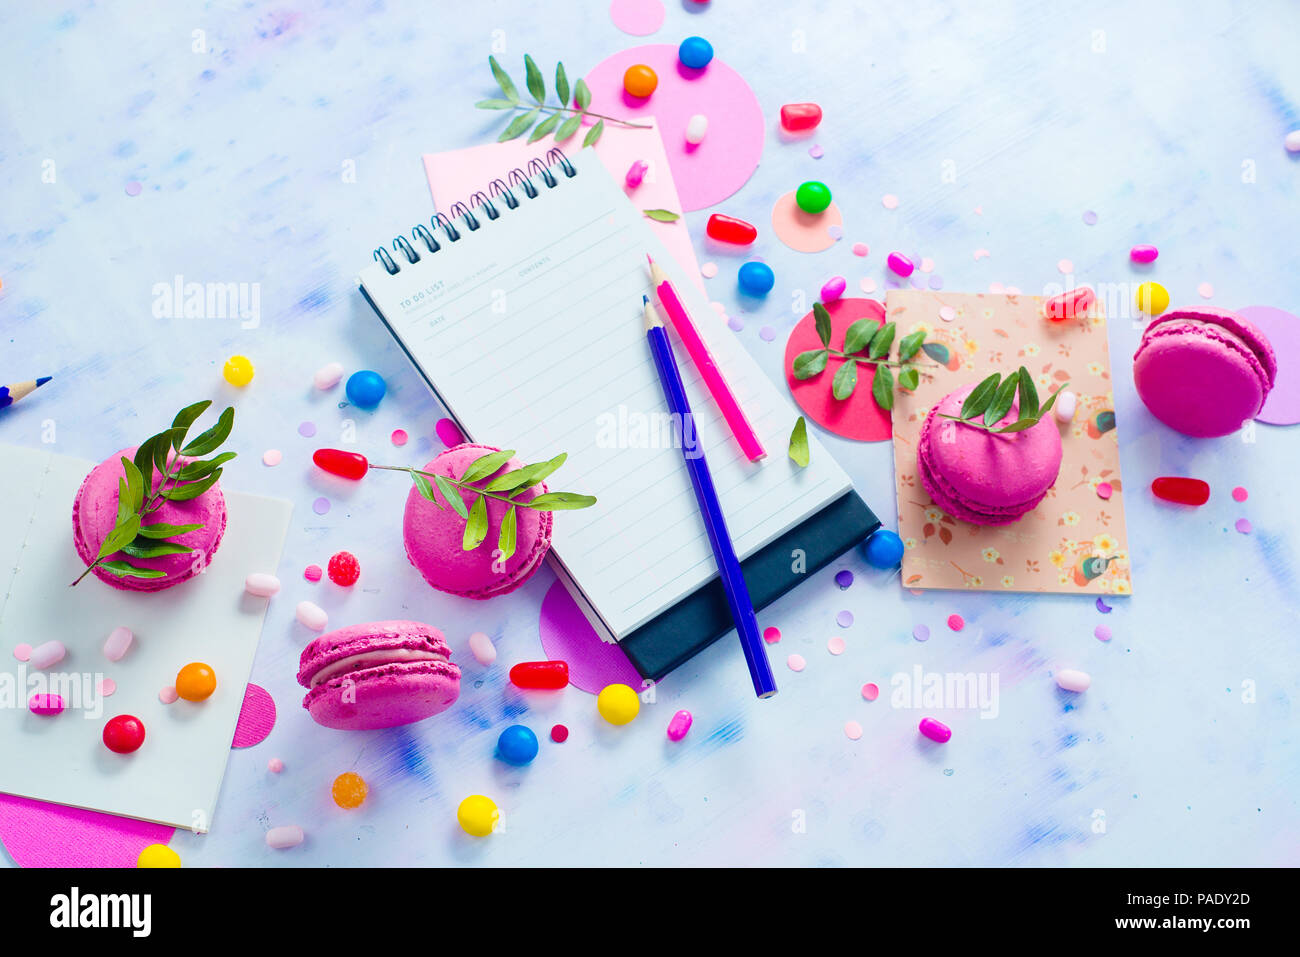 Party flat lay with confetti. To-do list with stationery, candies and macaroon cookies on a white wooden background. Colorful objects in high key with copy space. Stock Photo